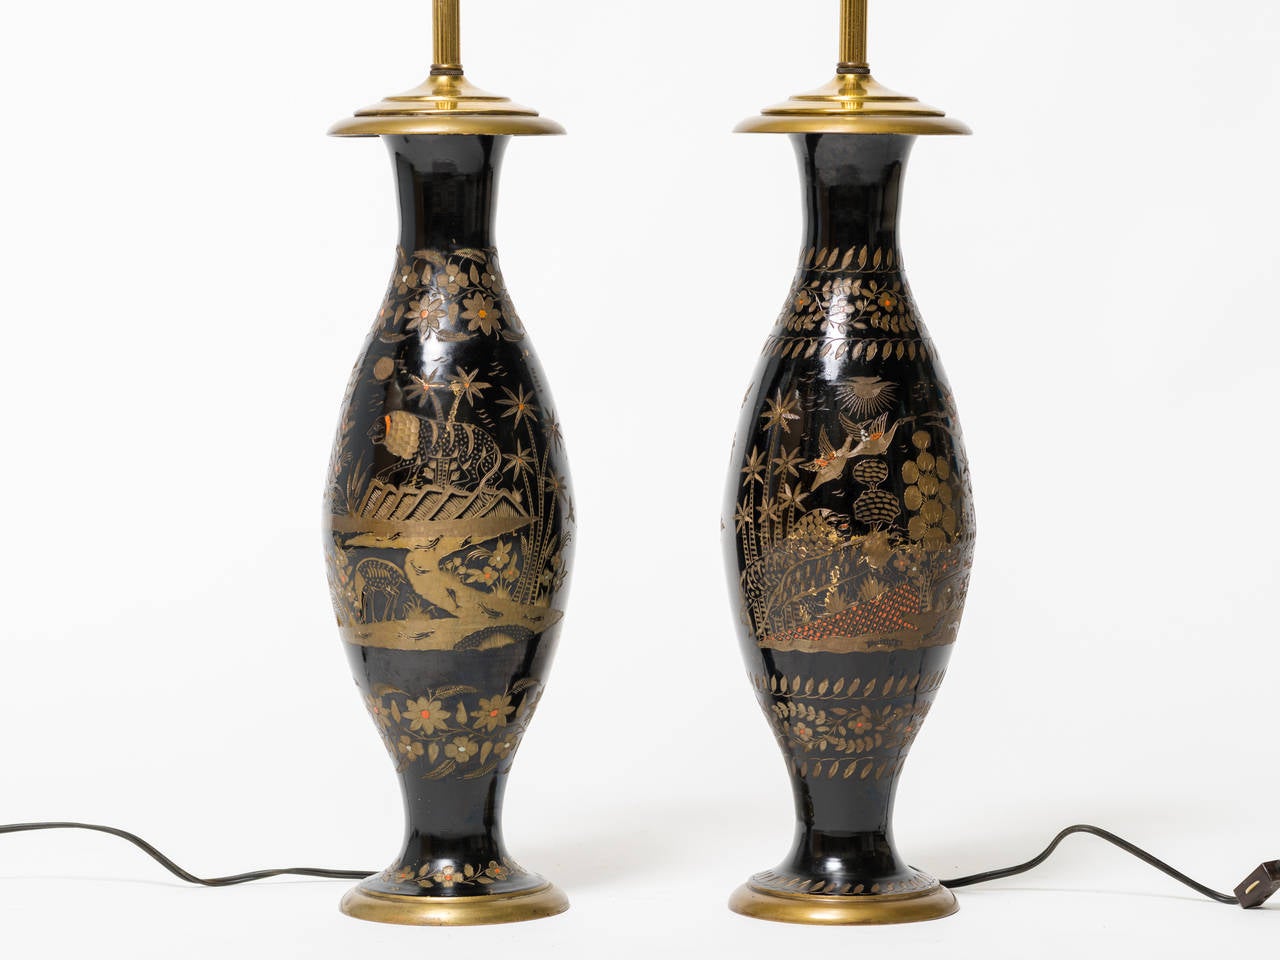 Pair of brass etched Asian motif table lamps.